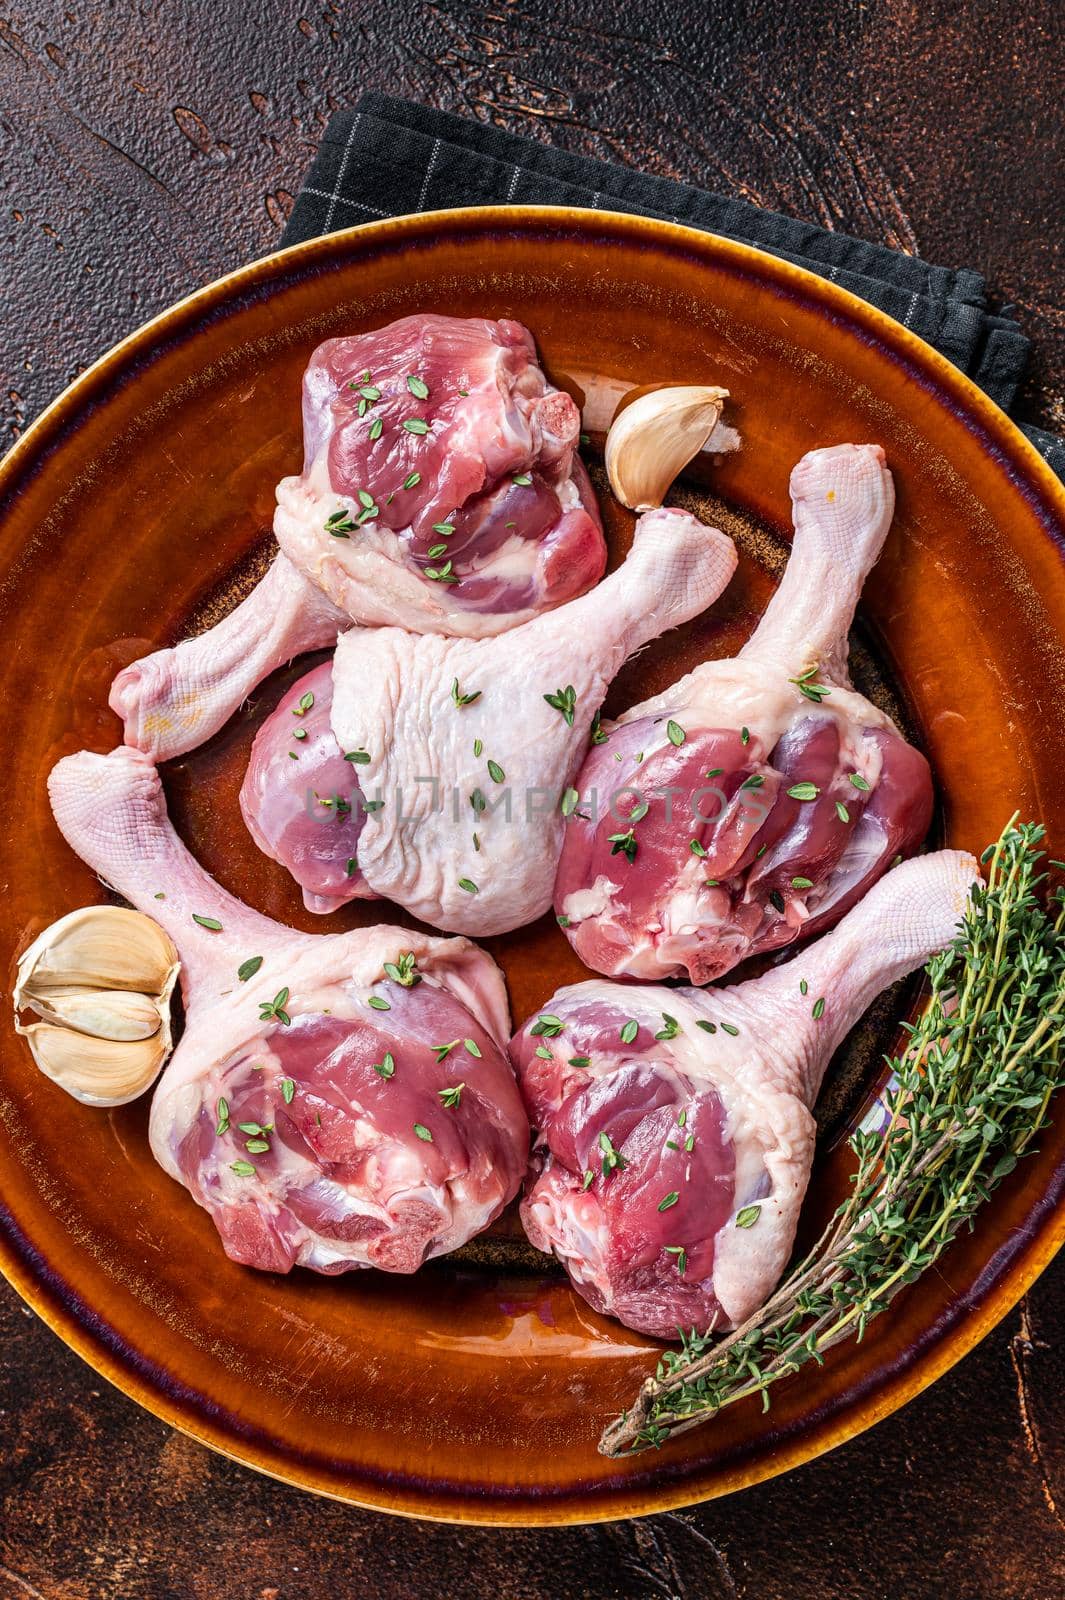 Raw Poultry meat - Duck legs drumsticks on a rustic plate with herbs. Dark background. Top view.